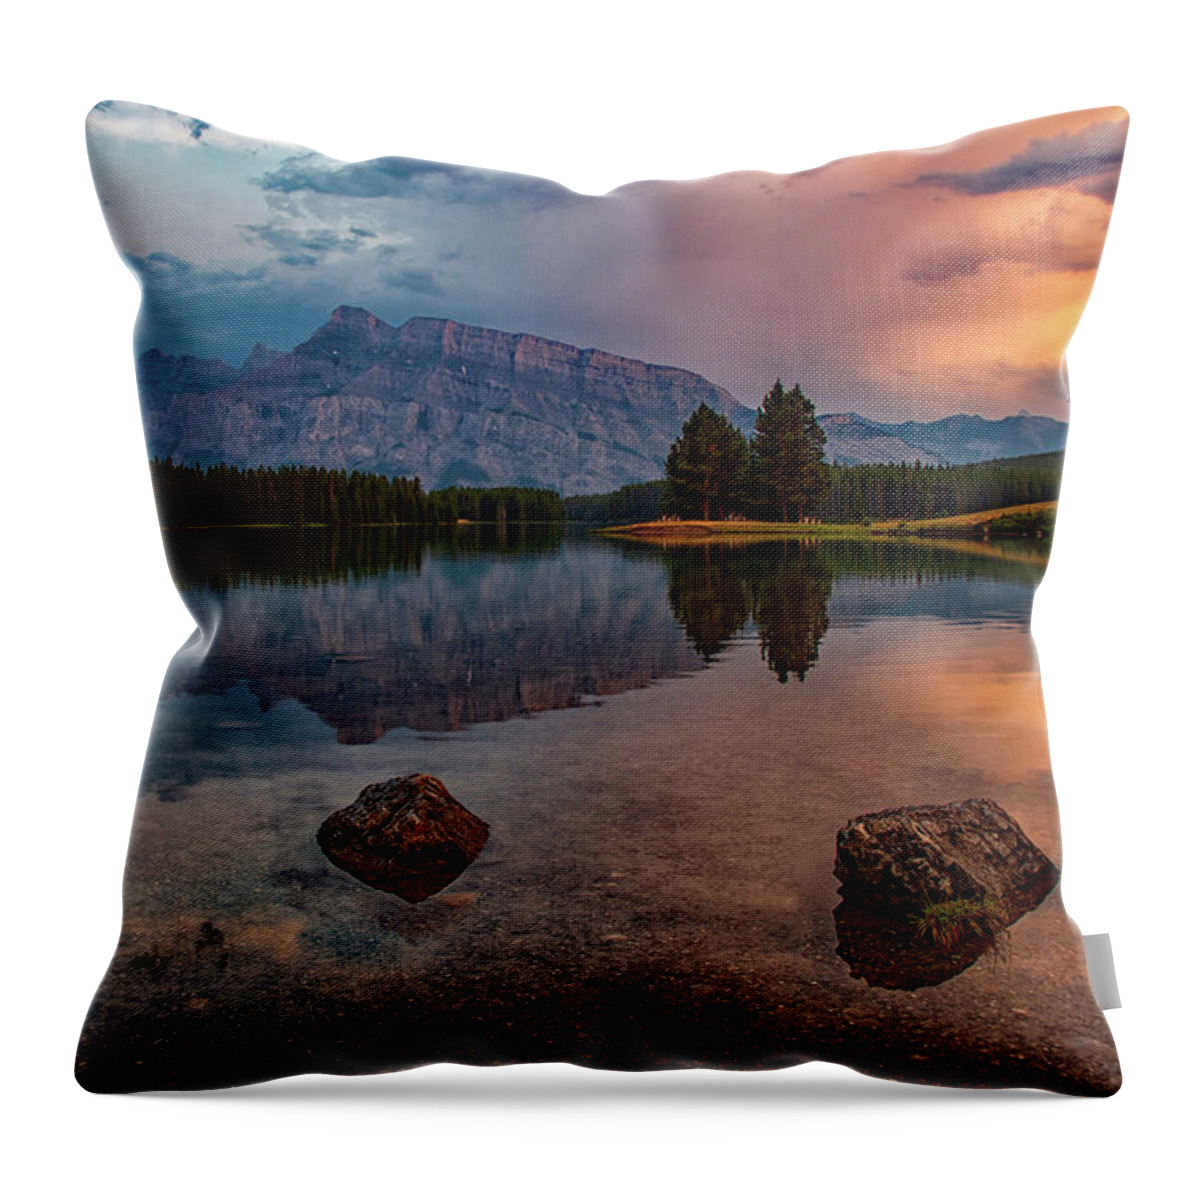 Banff National Park Throw Pillow featuring the photograph Stepping Stones by Darlene Bushue